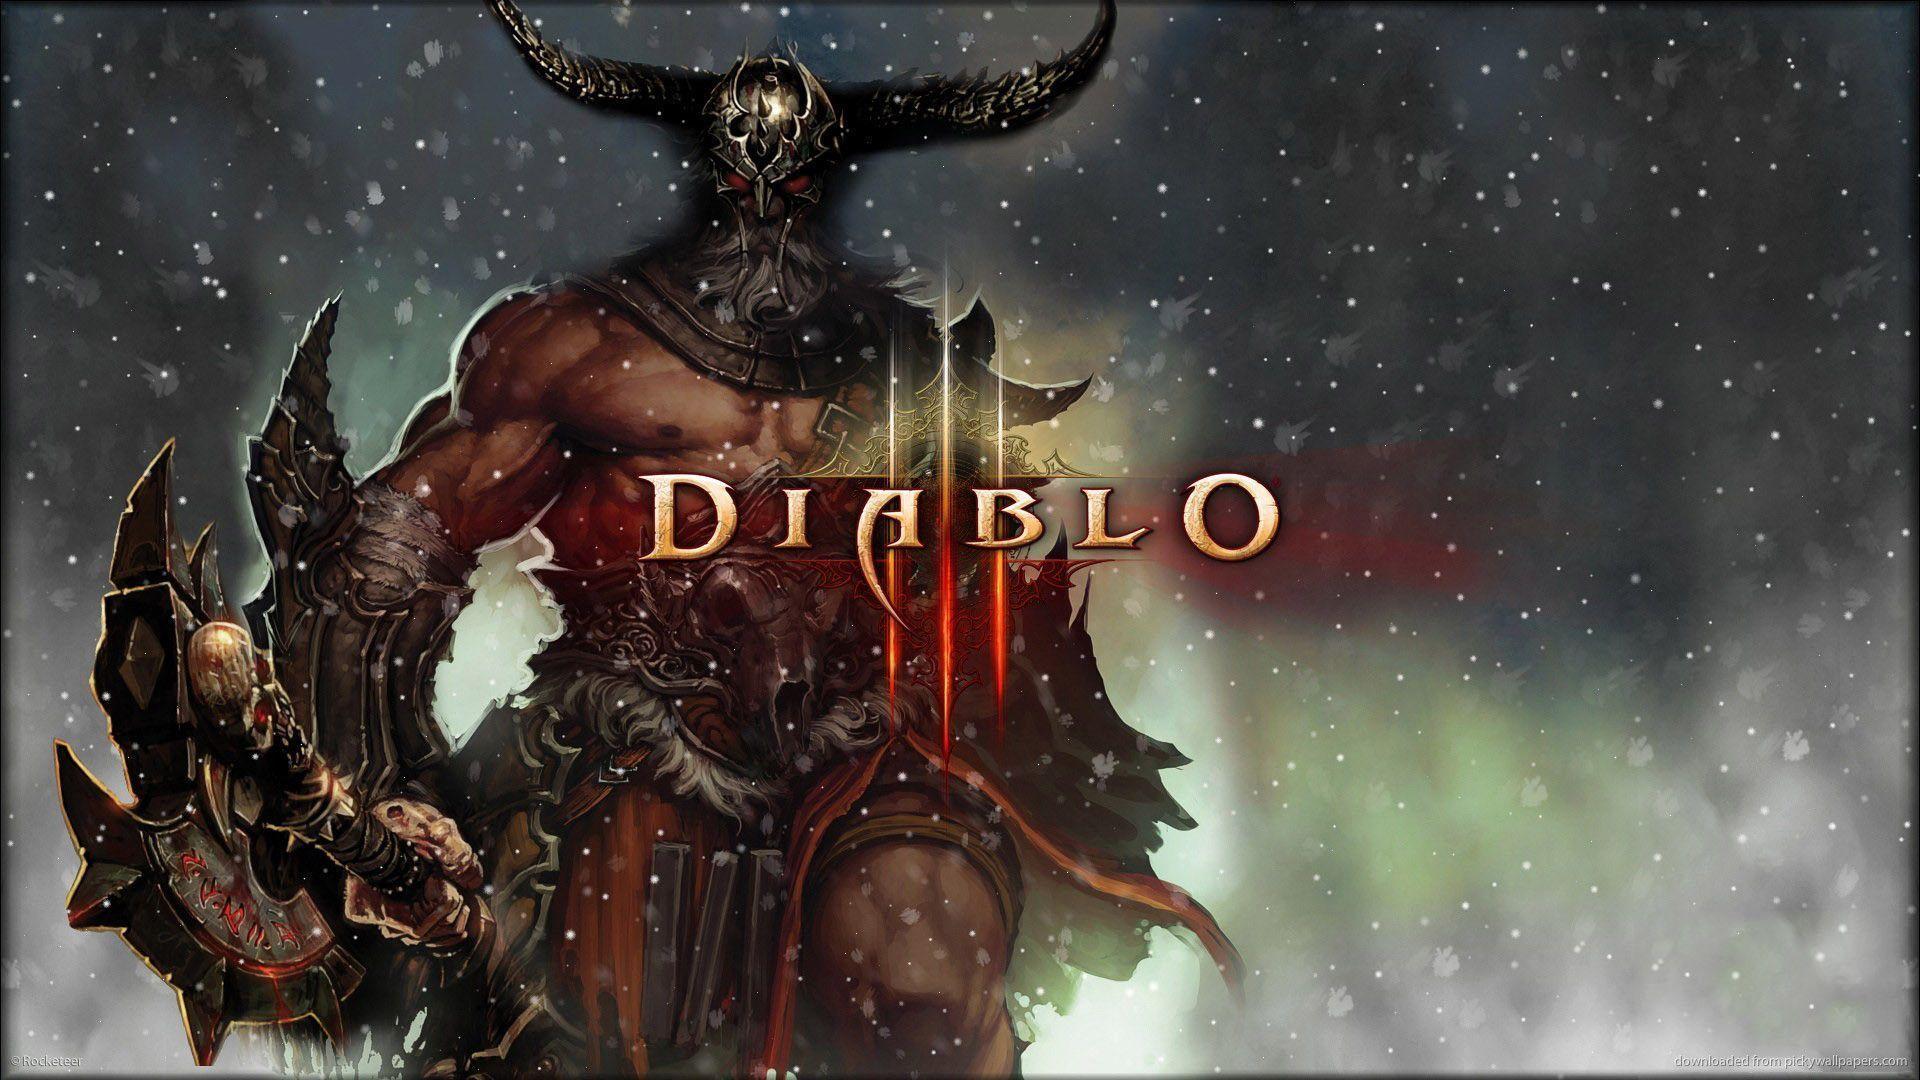 will there be a diablo 4 on pc?